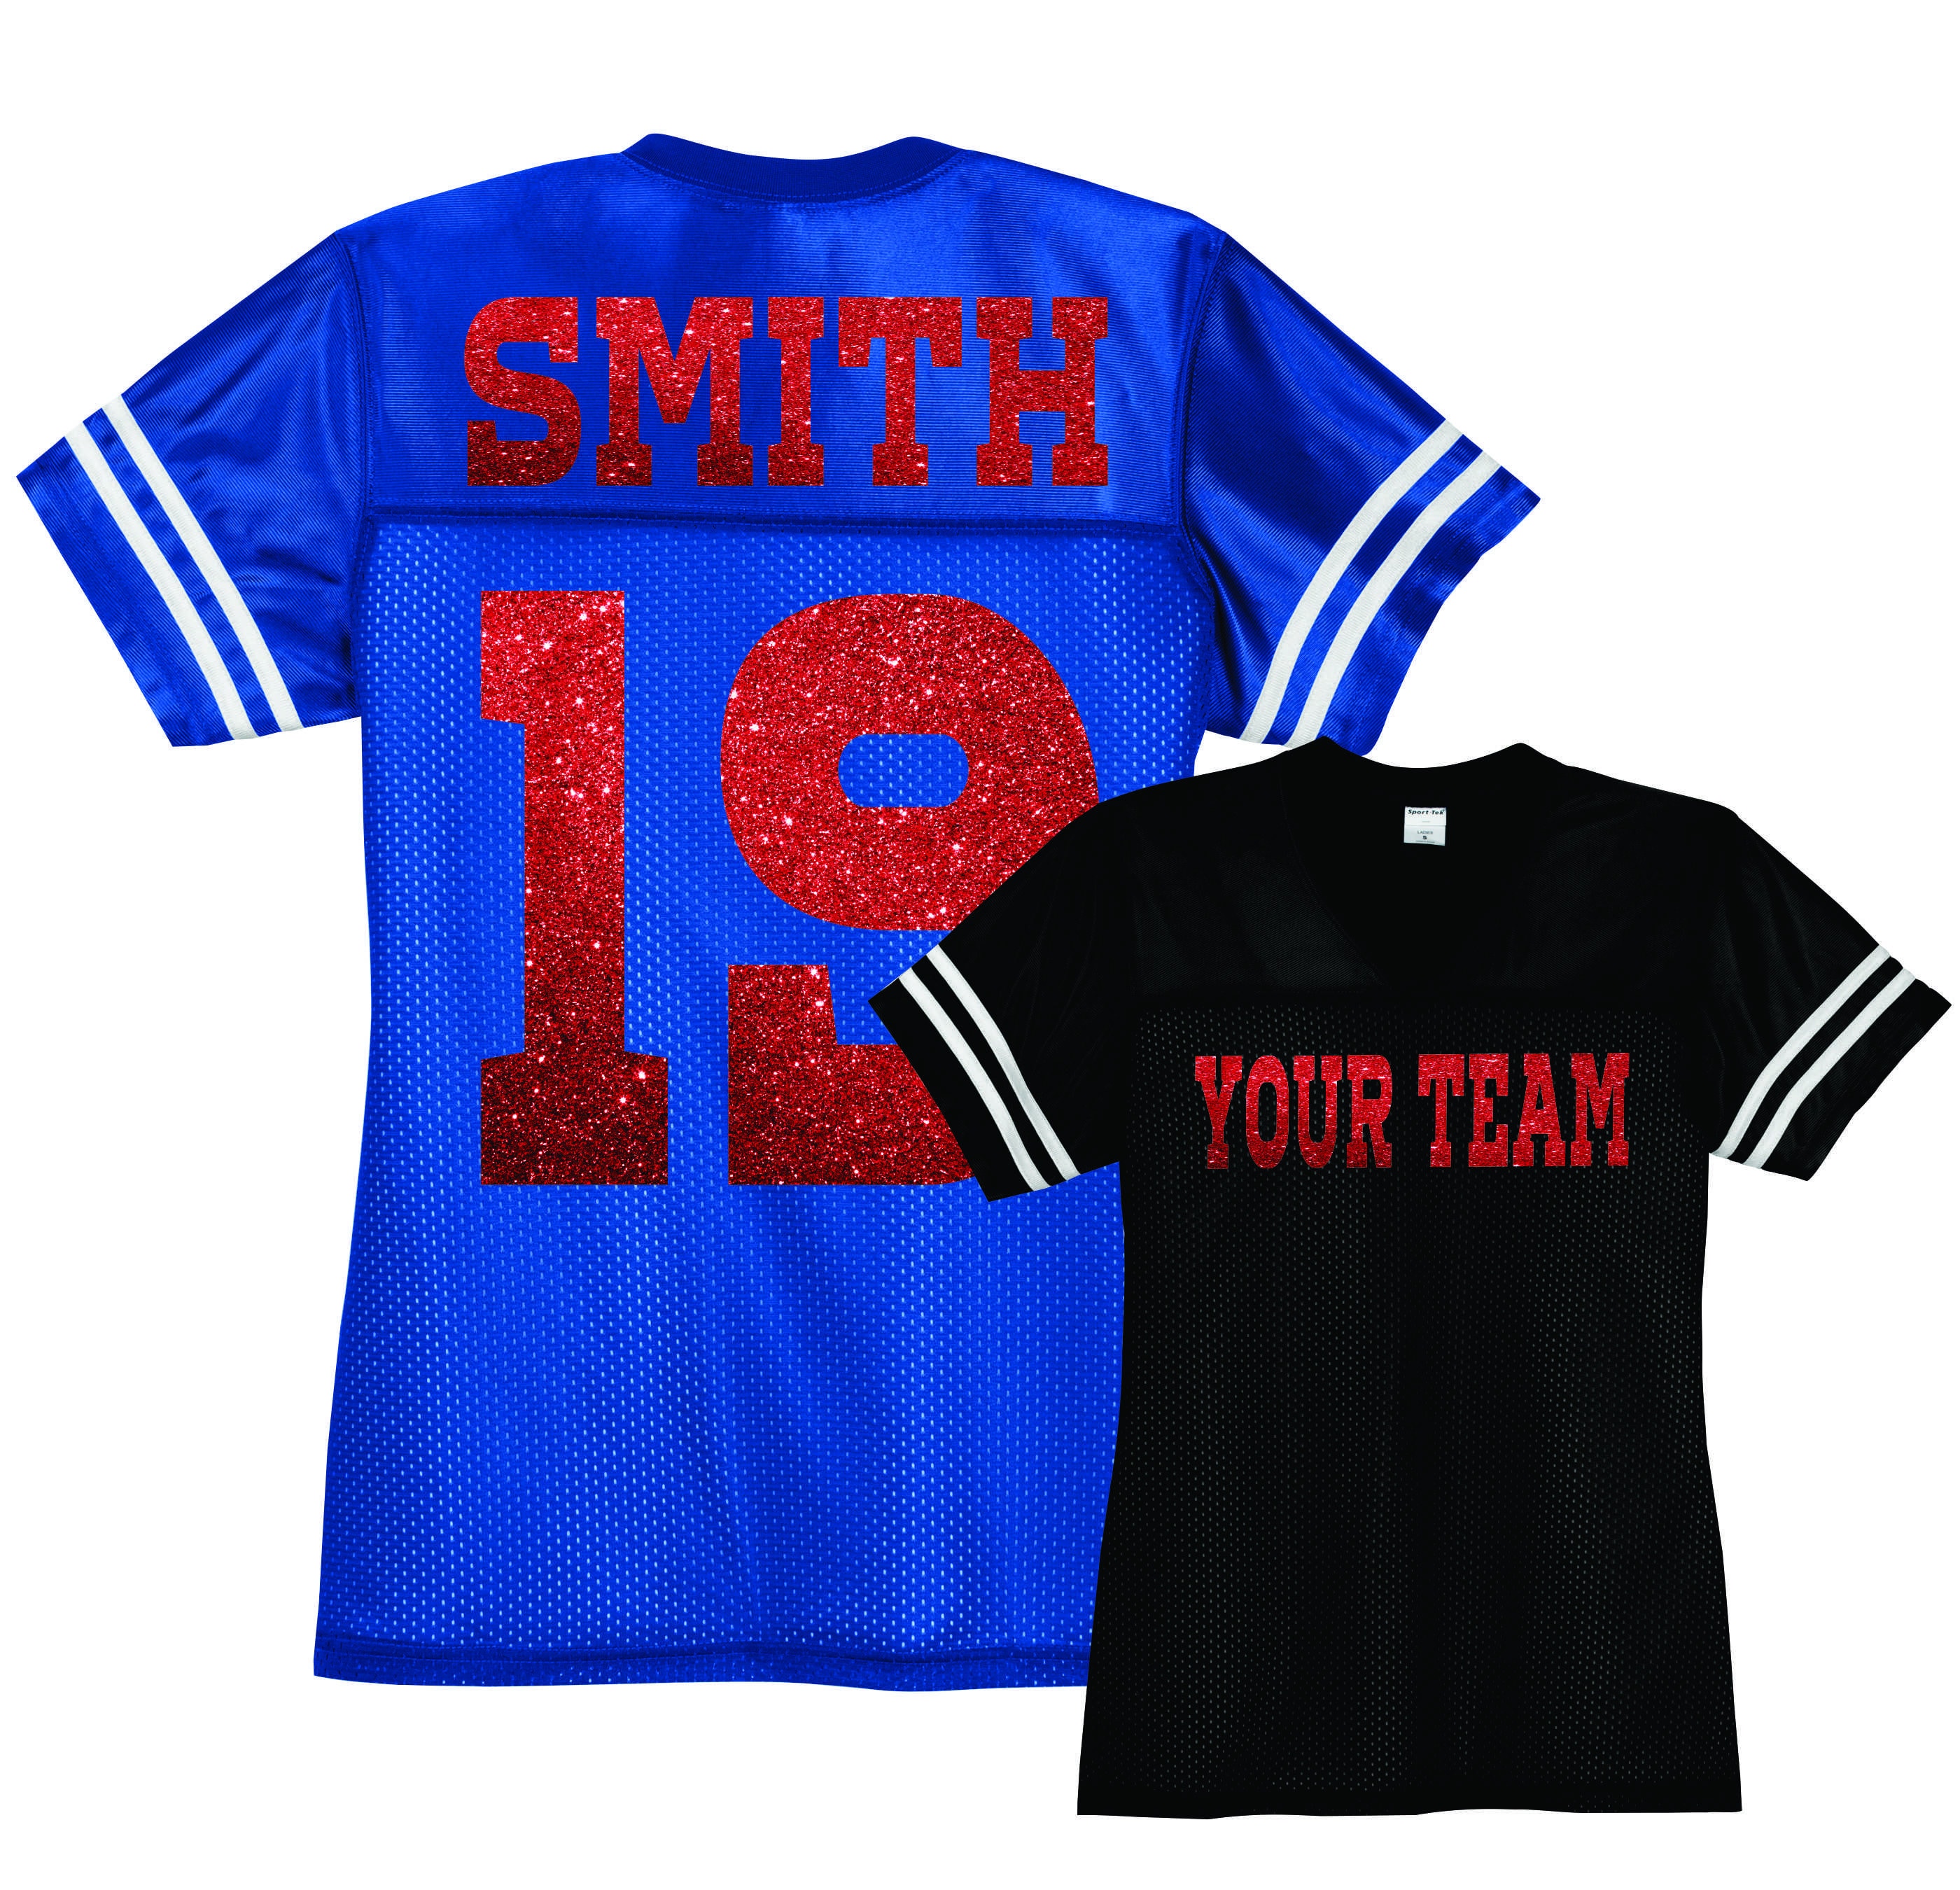 You Design Glitter Jersey, Football, Baseball, Soccer, Personalized Team  and Bling Colors